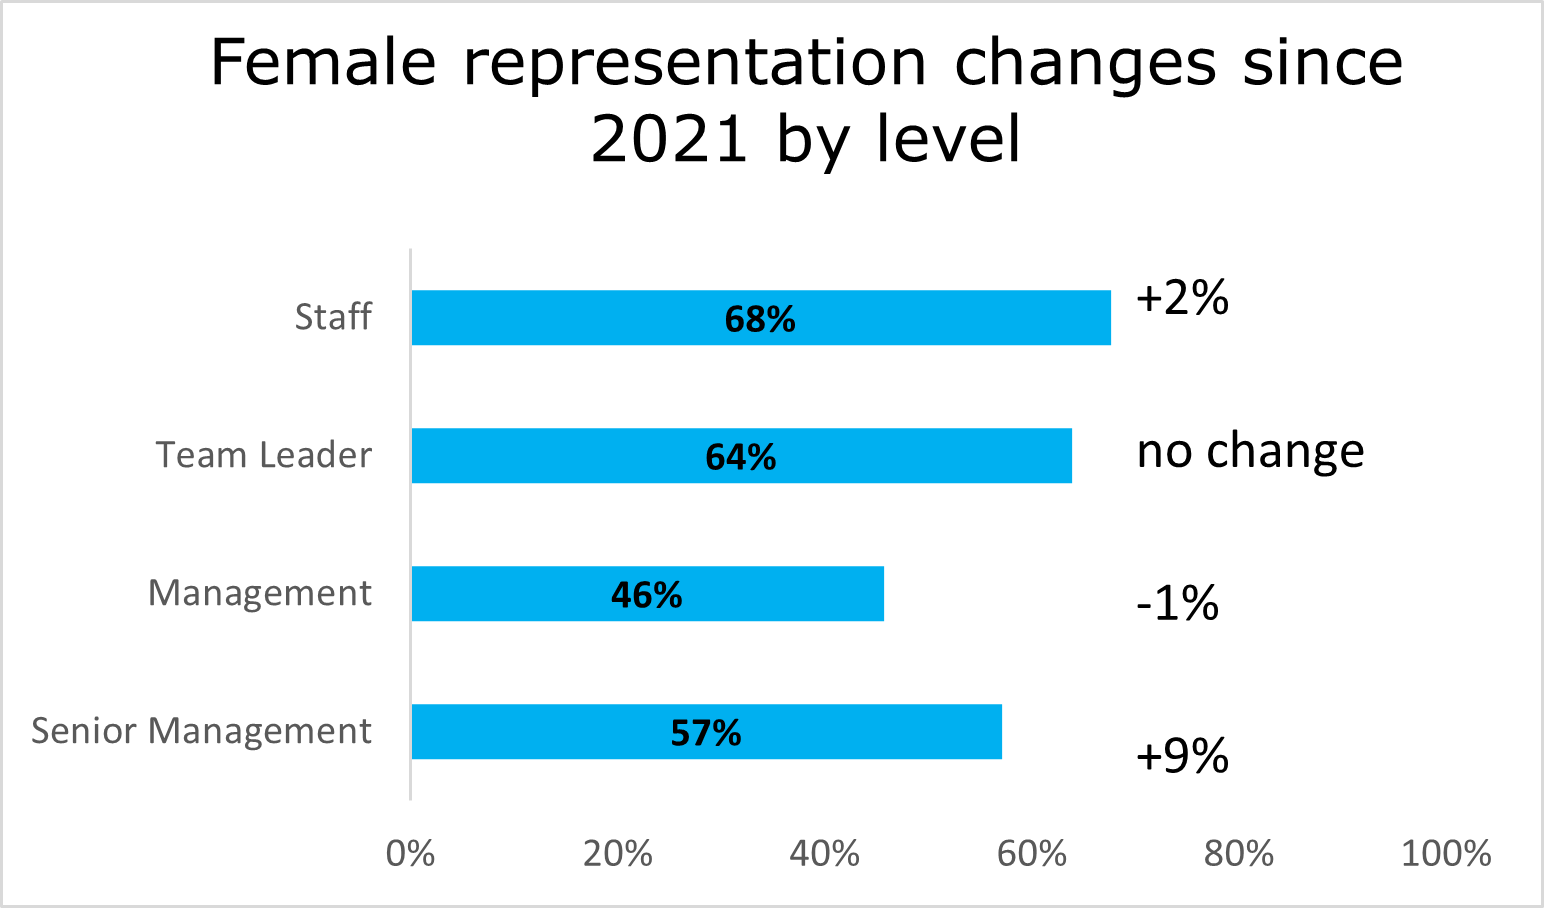 Bar graph showing female representation changes sicne 2021 by level. The vertical axis is role positions. The horizontal axis is percentage.